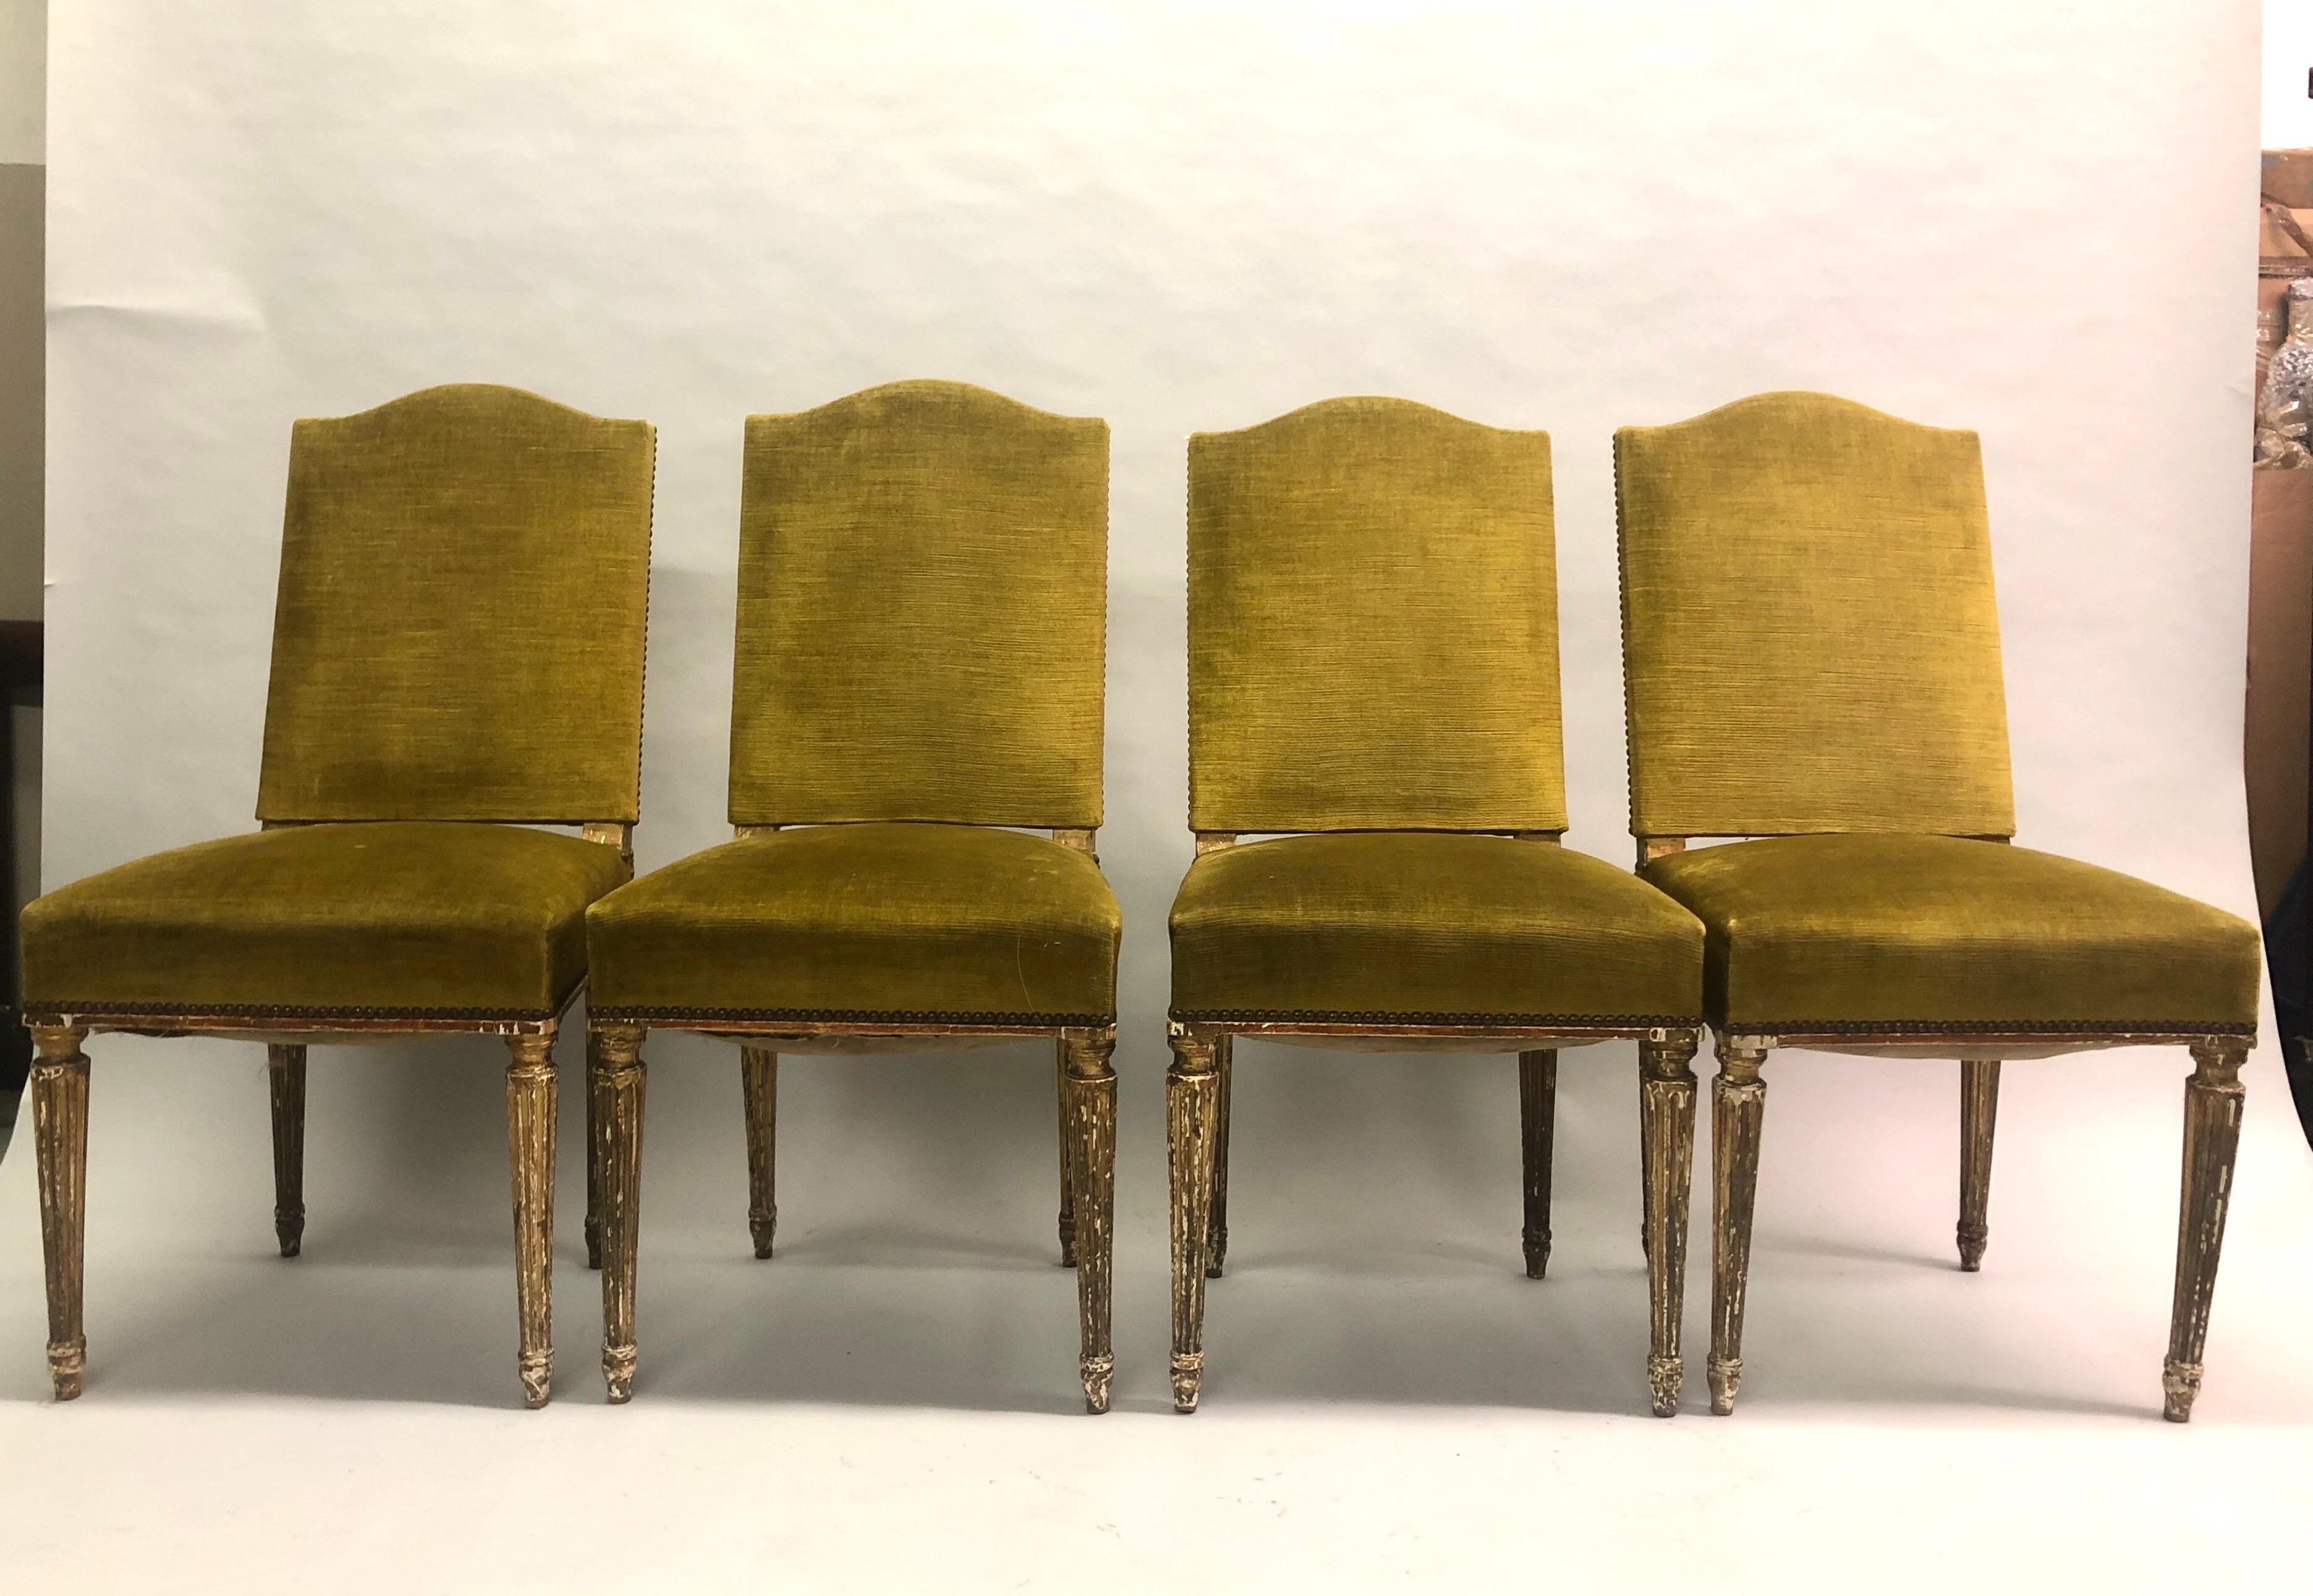 An elegant set of 4 French midcentury / 1940s dining chairs in the modern neoclassical style attributed to Maison Jansen. The chairs feature a sensuous form with fluted legs that are partially gilt and sculpted chair backs.